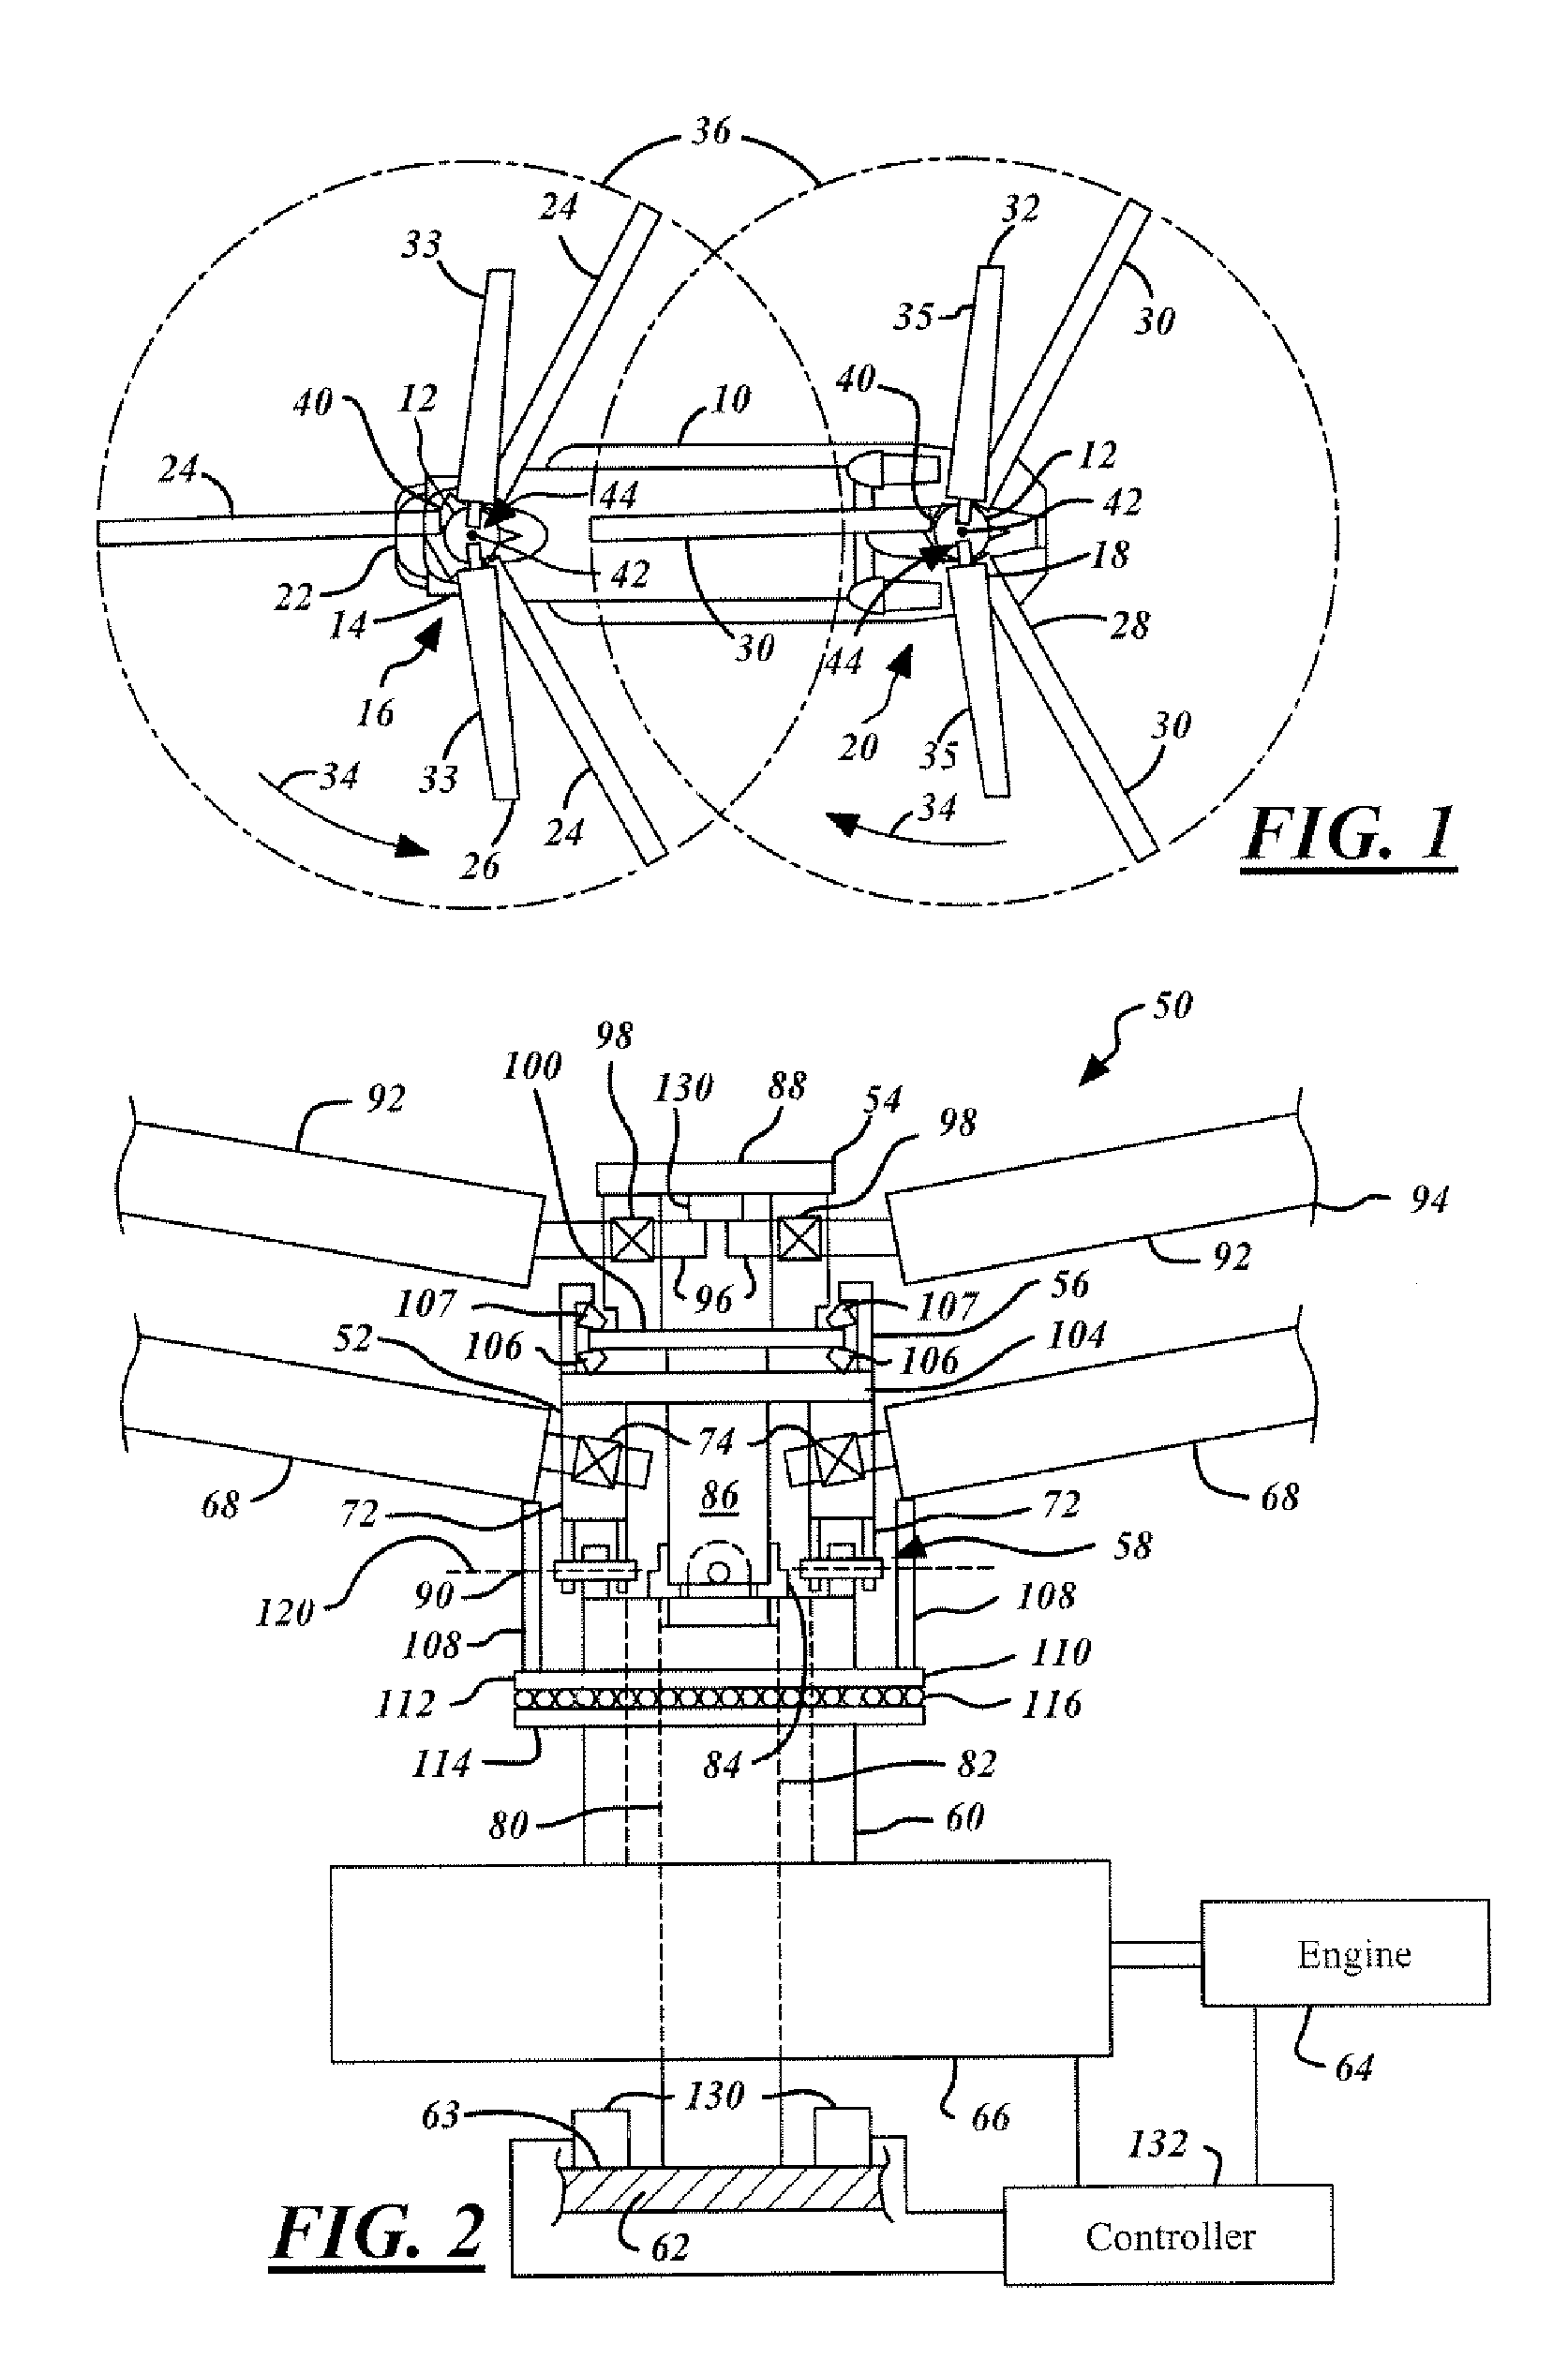 An unloaded lift offset rotor system for a helicopter